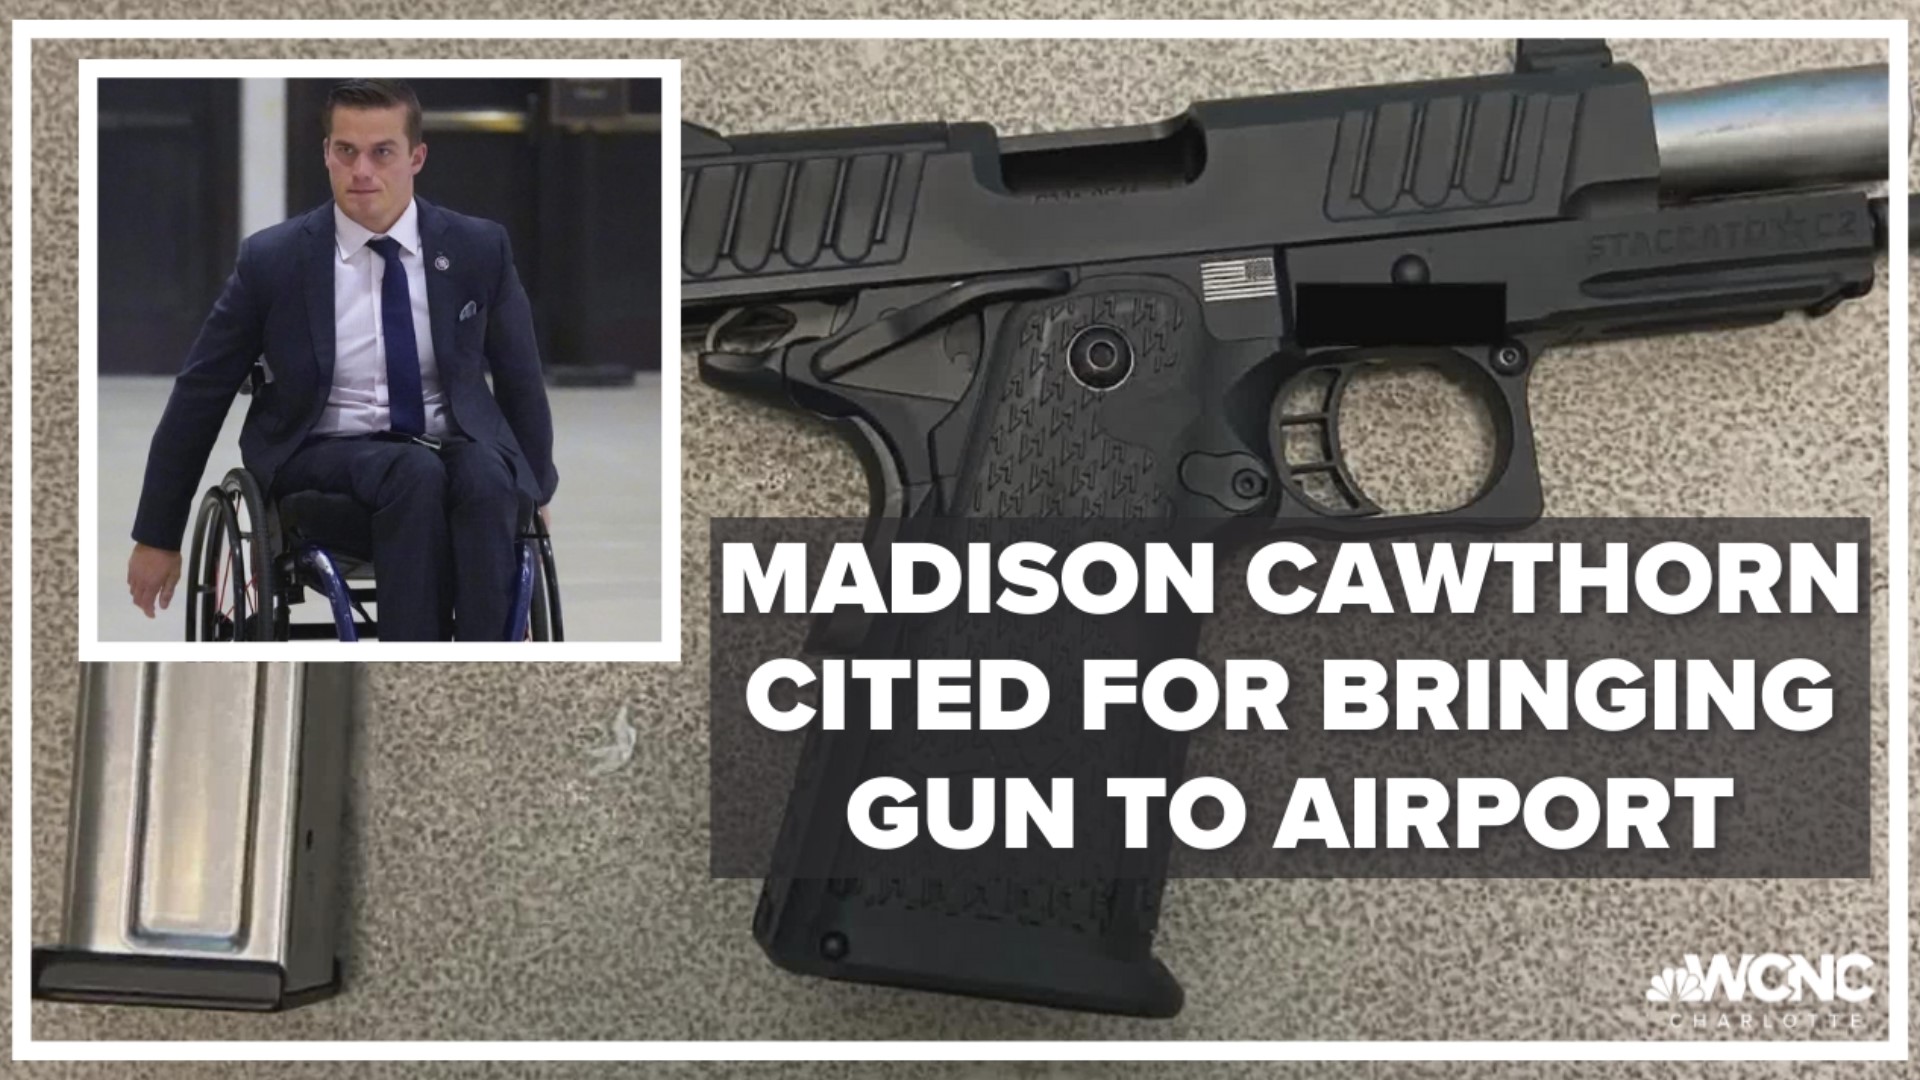 TSA agents reportedly found the loaded handgun during a screening at a security checkpoint at Charlotte-Douglas International Airport Tuesday.